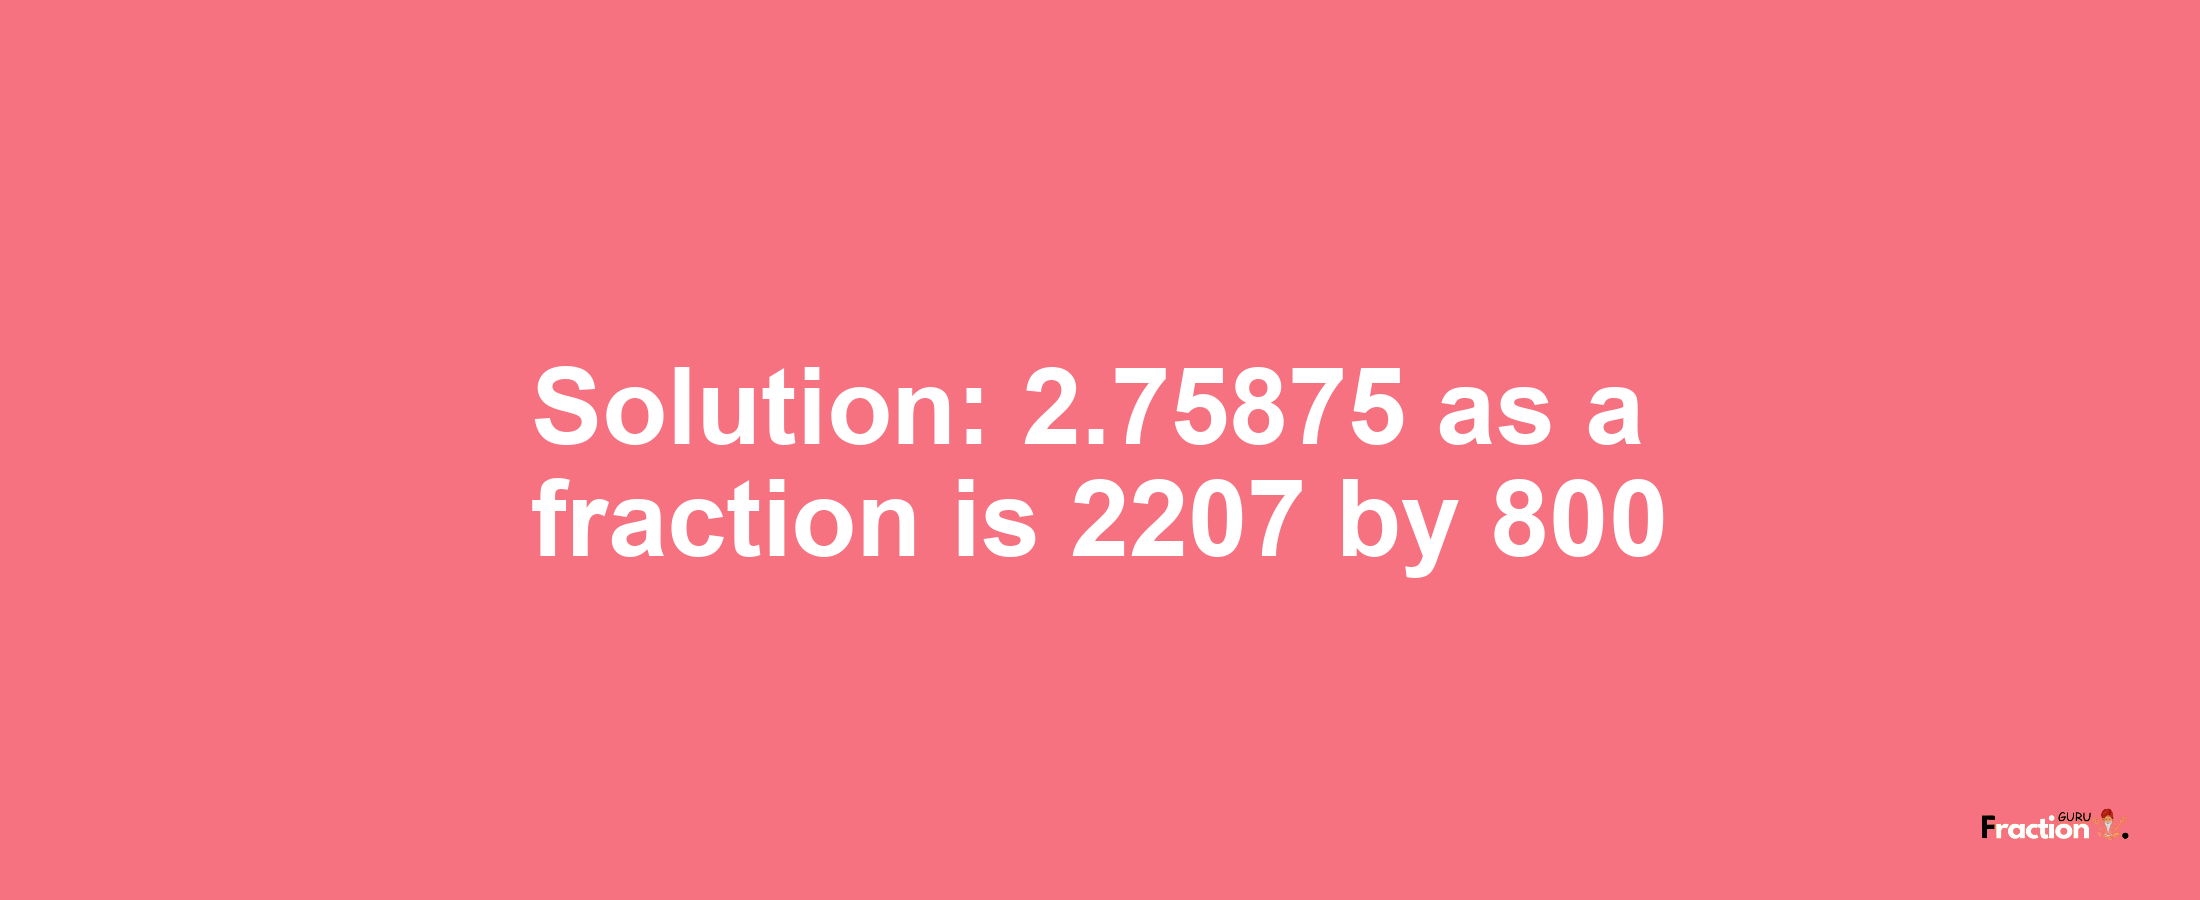 Solution:2.75875 as a fraction is 2207/800